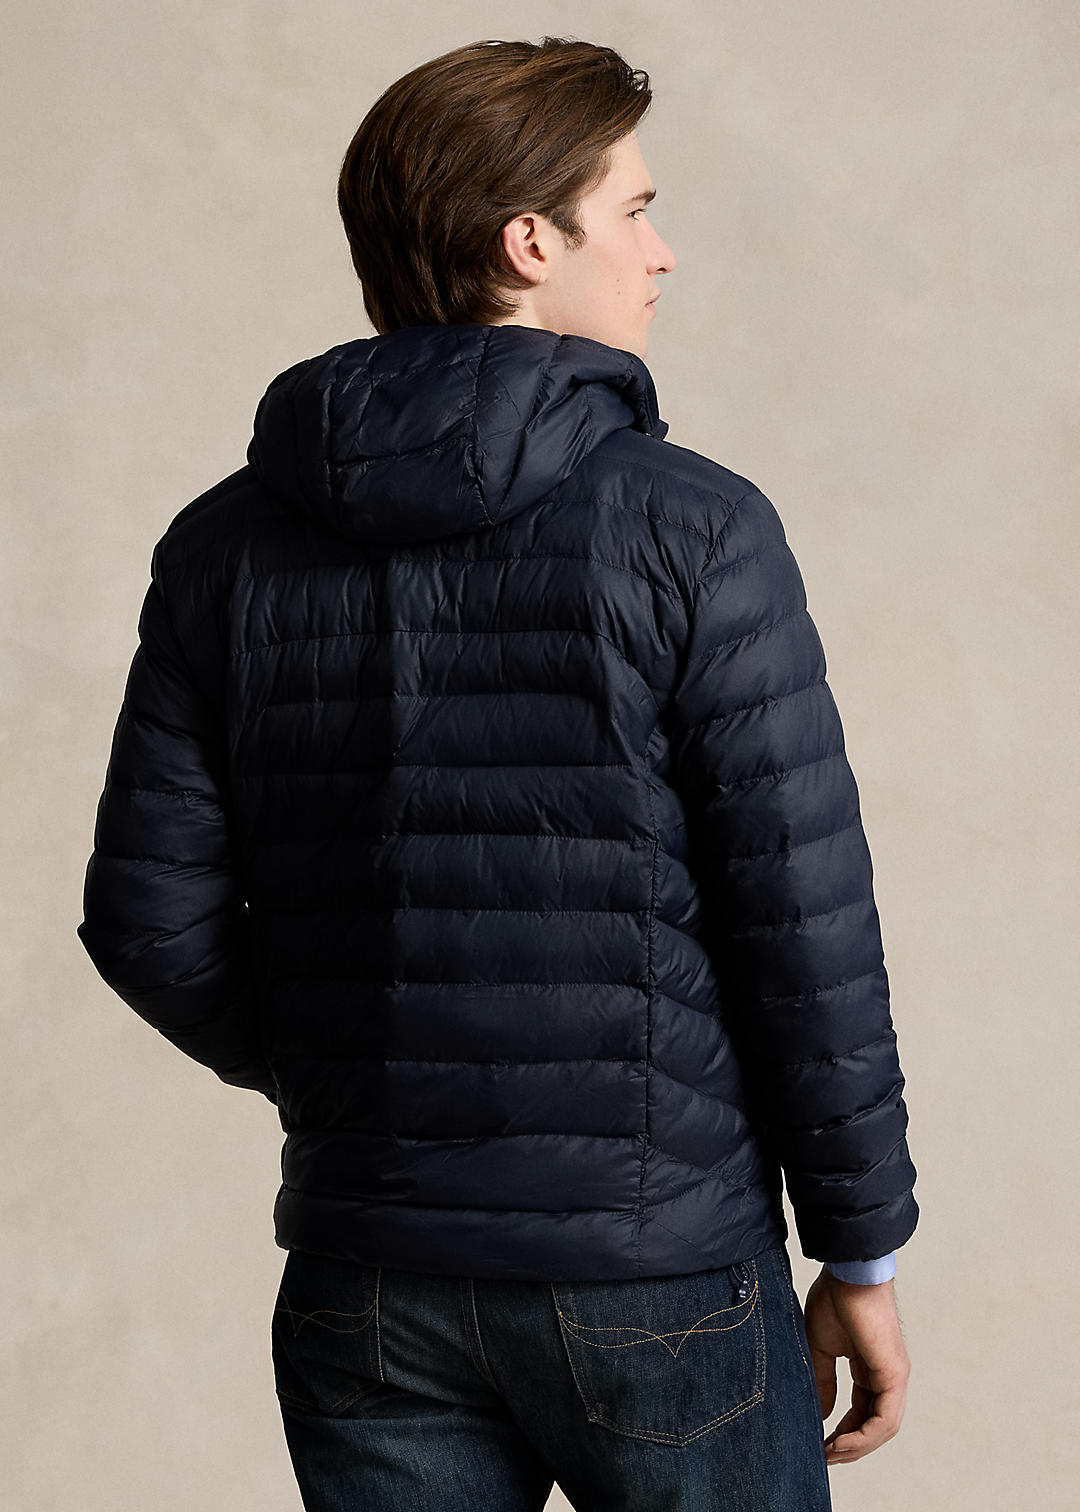 The Packable Hooded Jacket